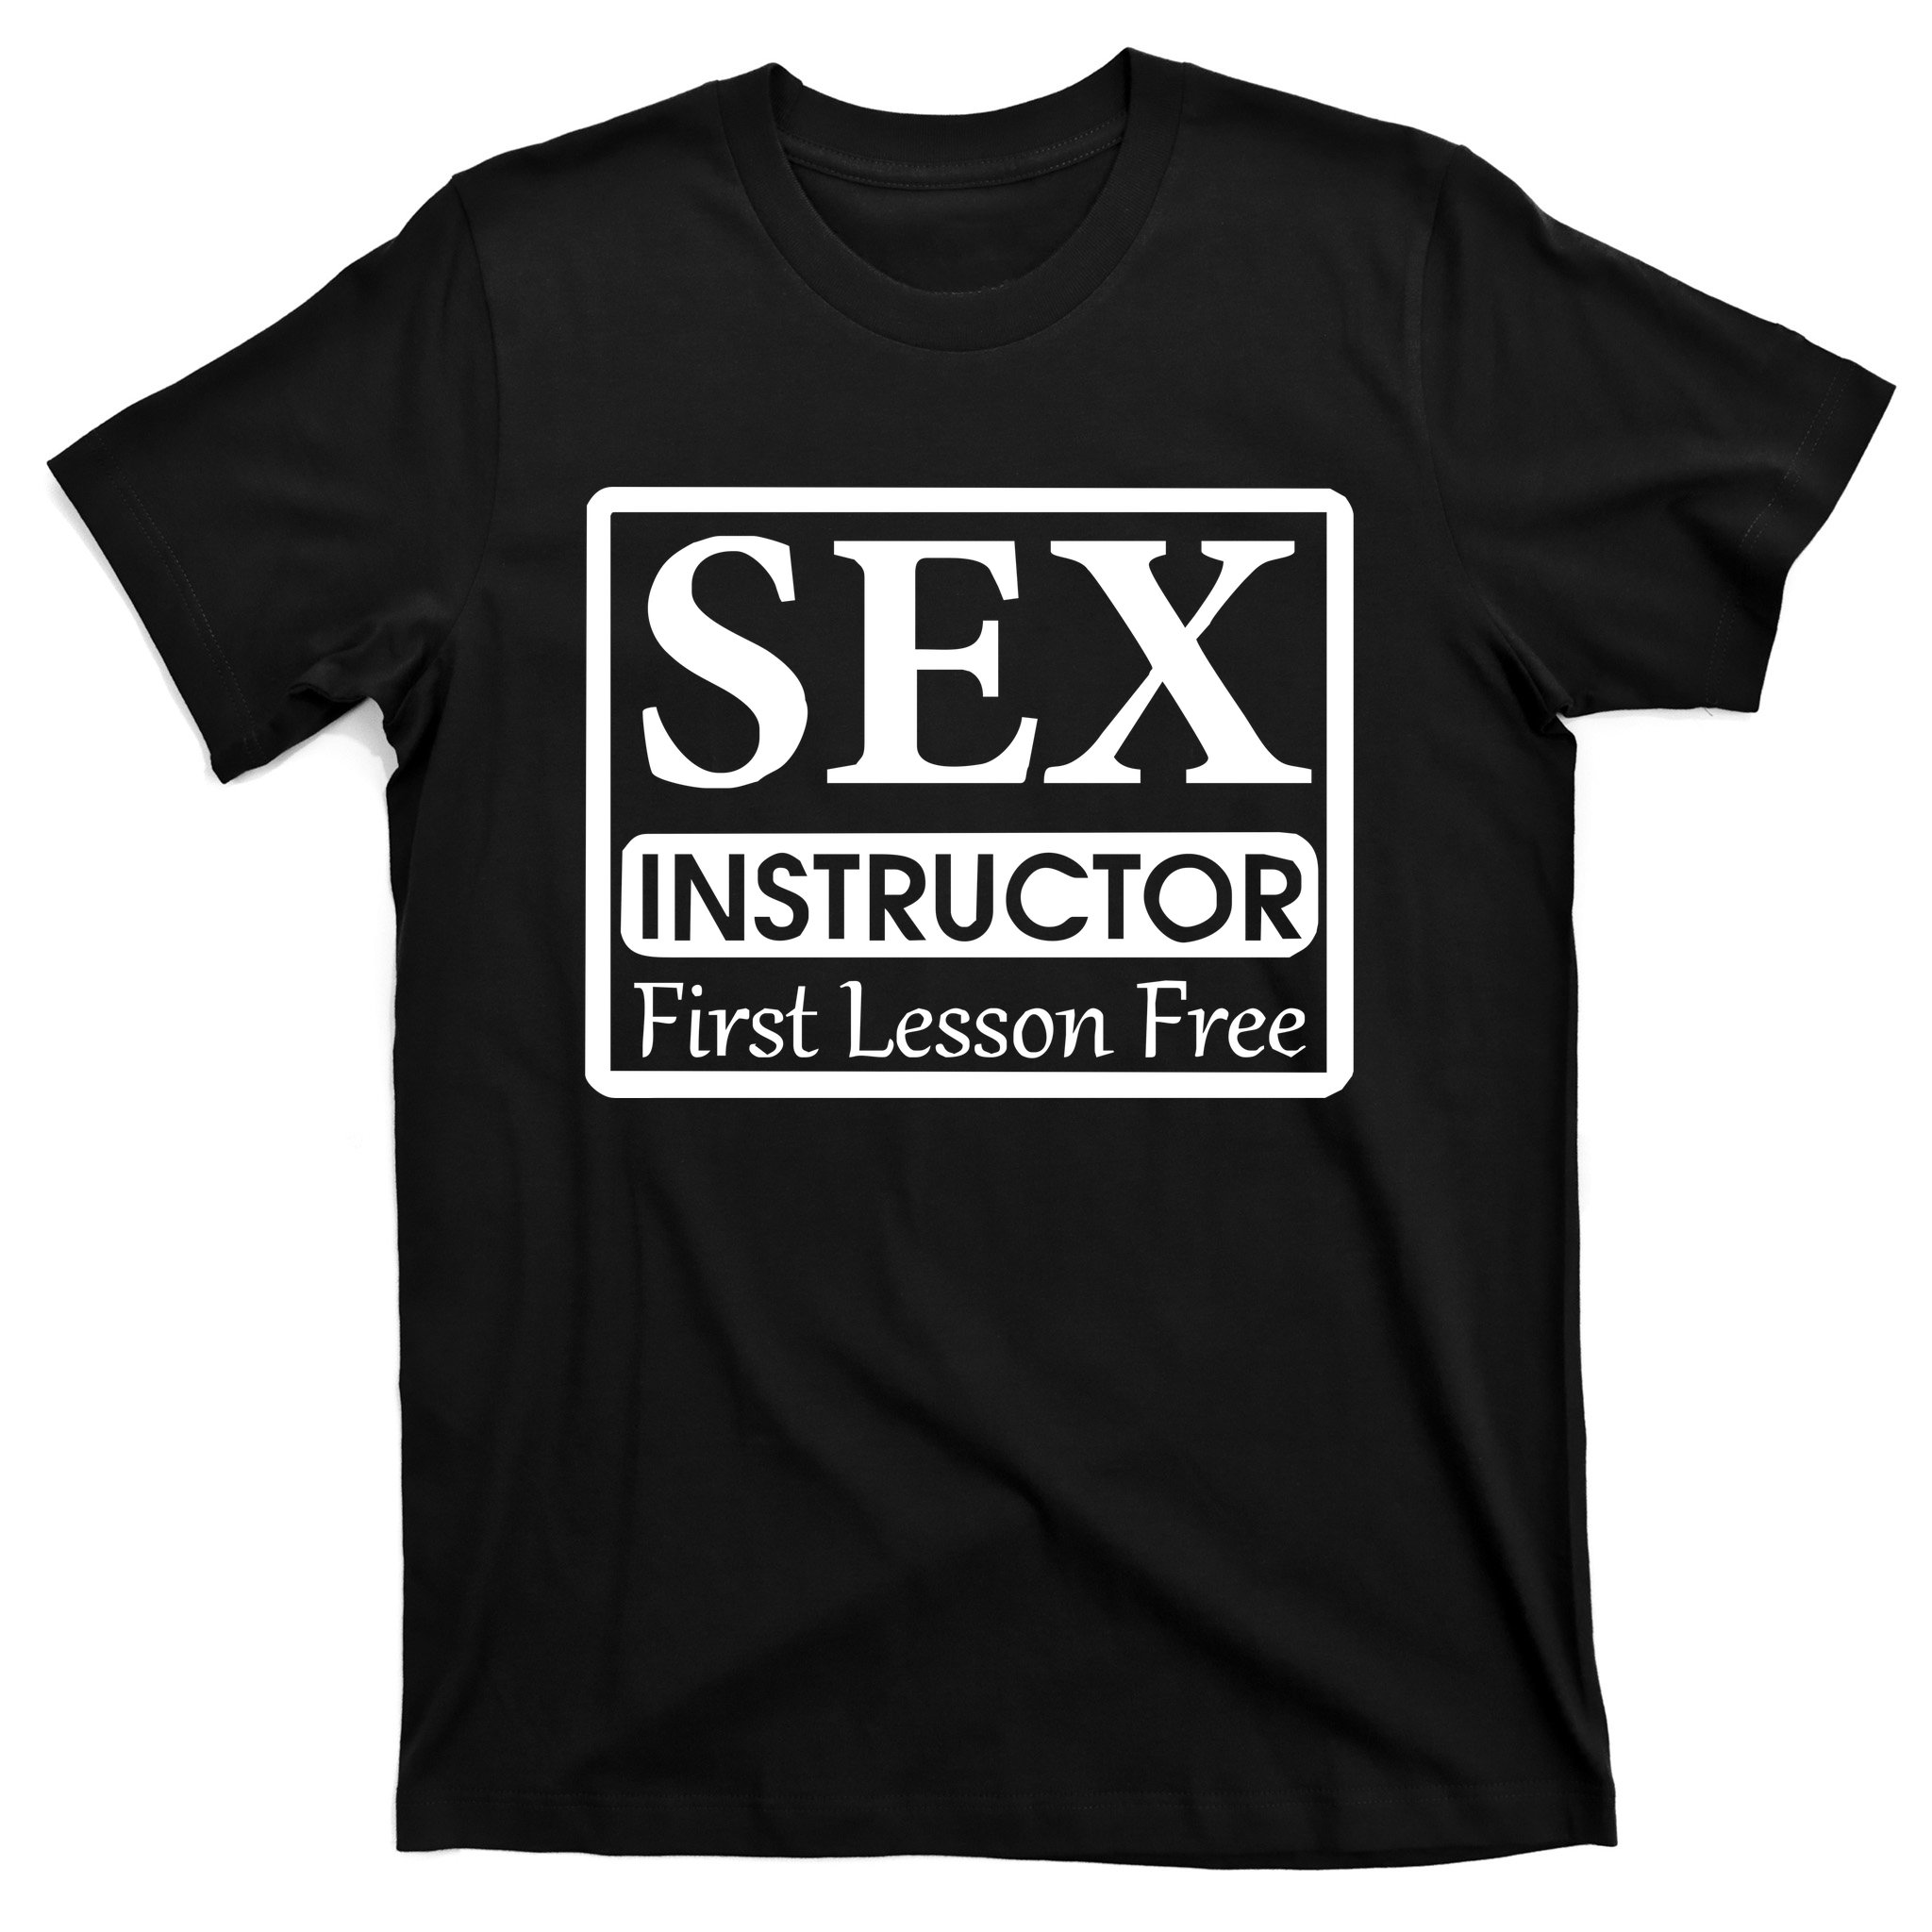 used italian sex instructor first lesson free spell out t shirt|humorous shirt of the real latin lover